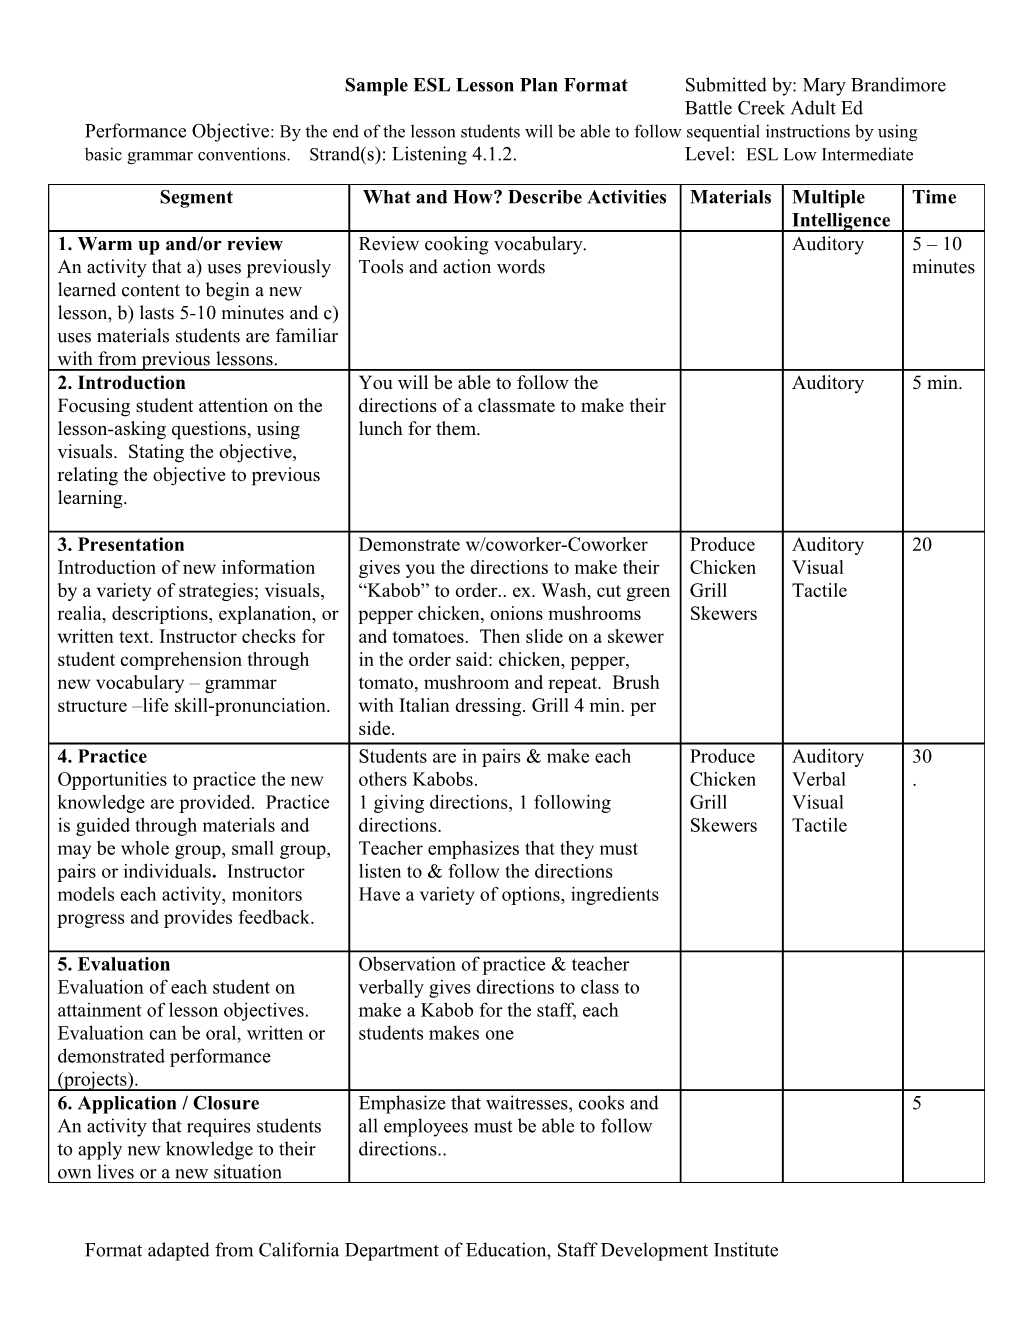 Sample ESL Lesson Plan Format Submitted By: Mary Brandimore